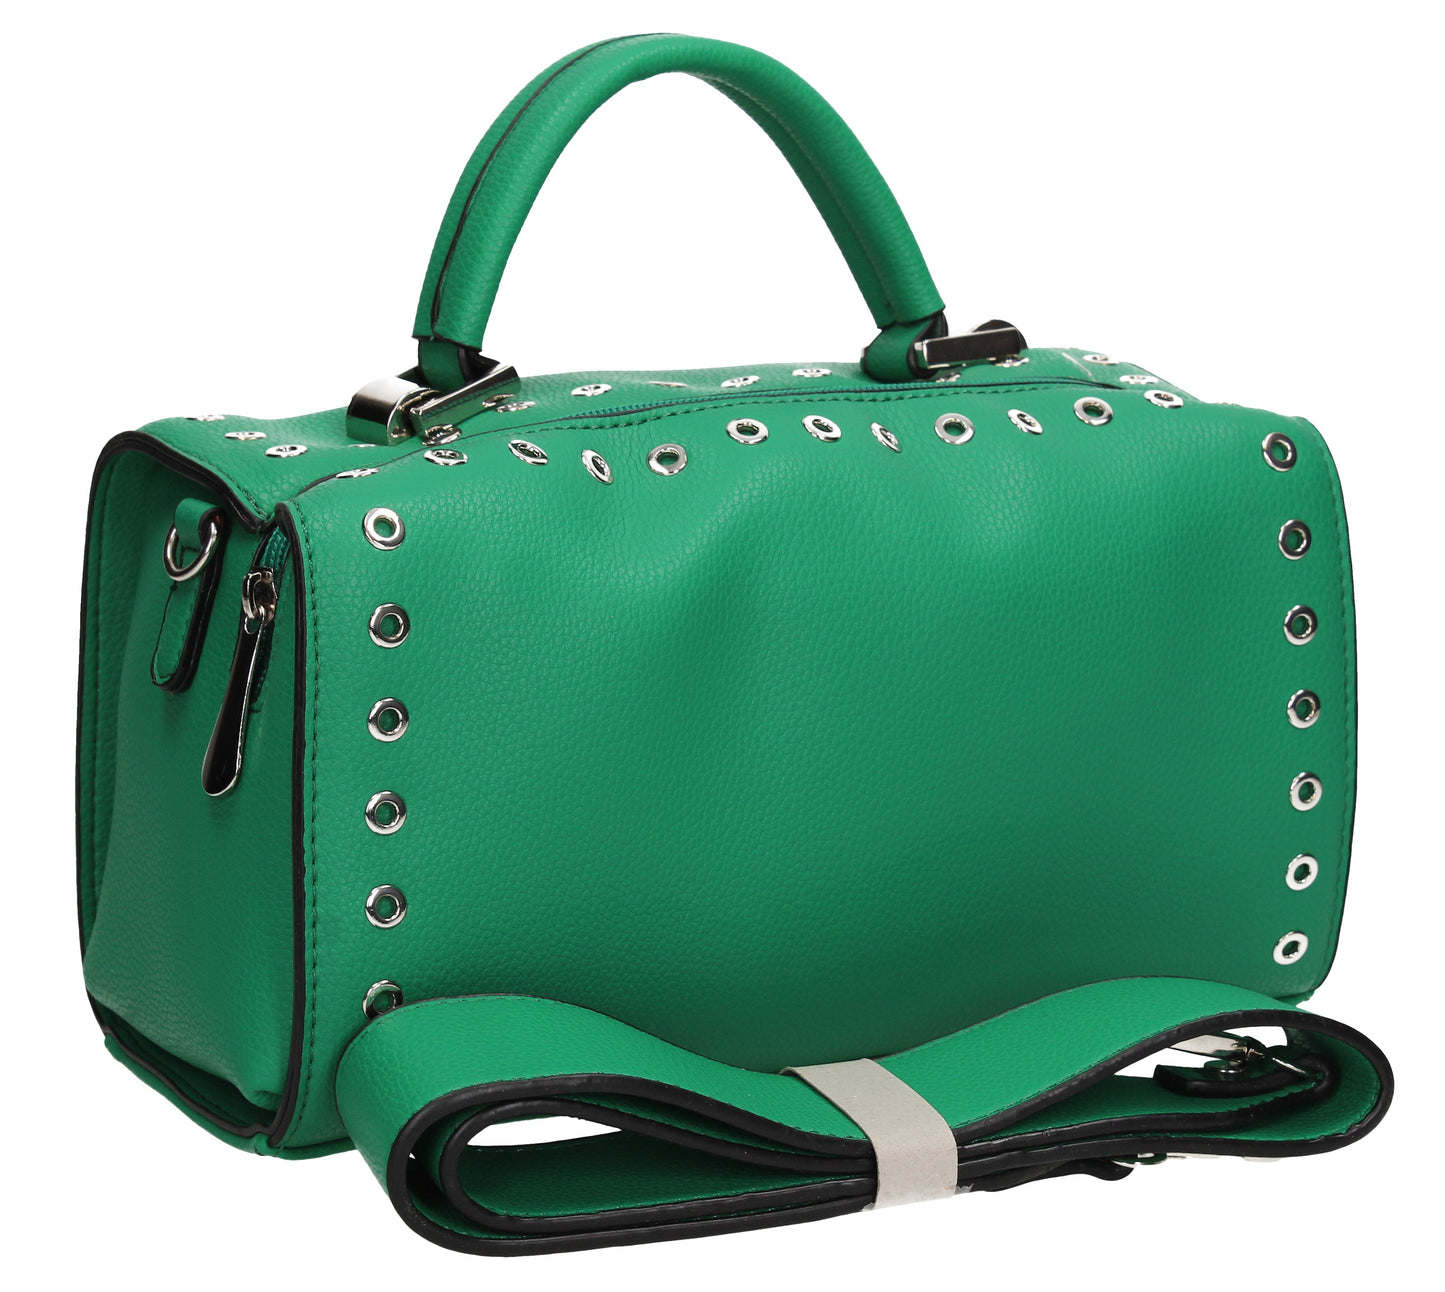 Buy your Anna Handbag Green Today! Buy with confidence from Swankyswans